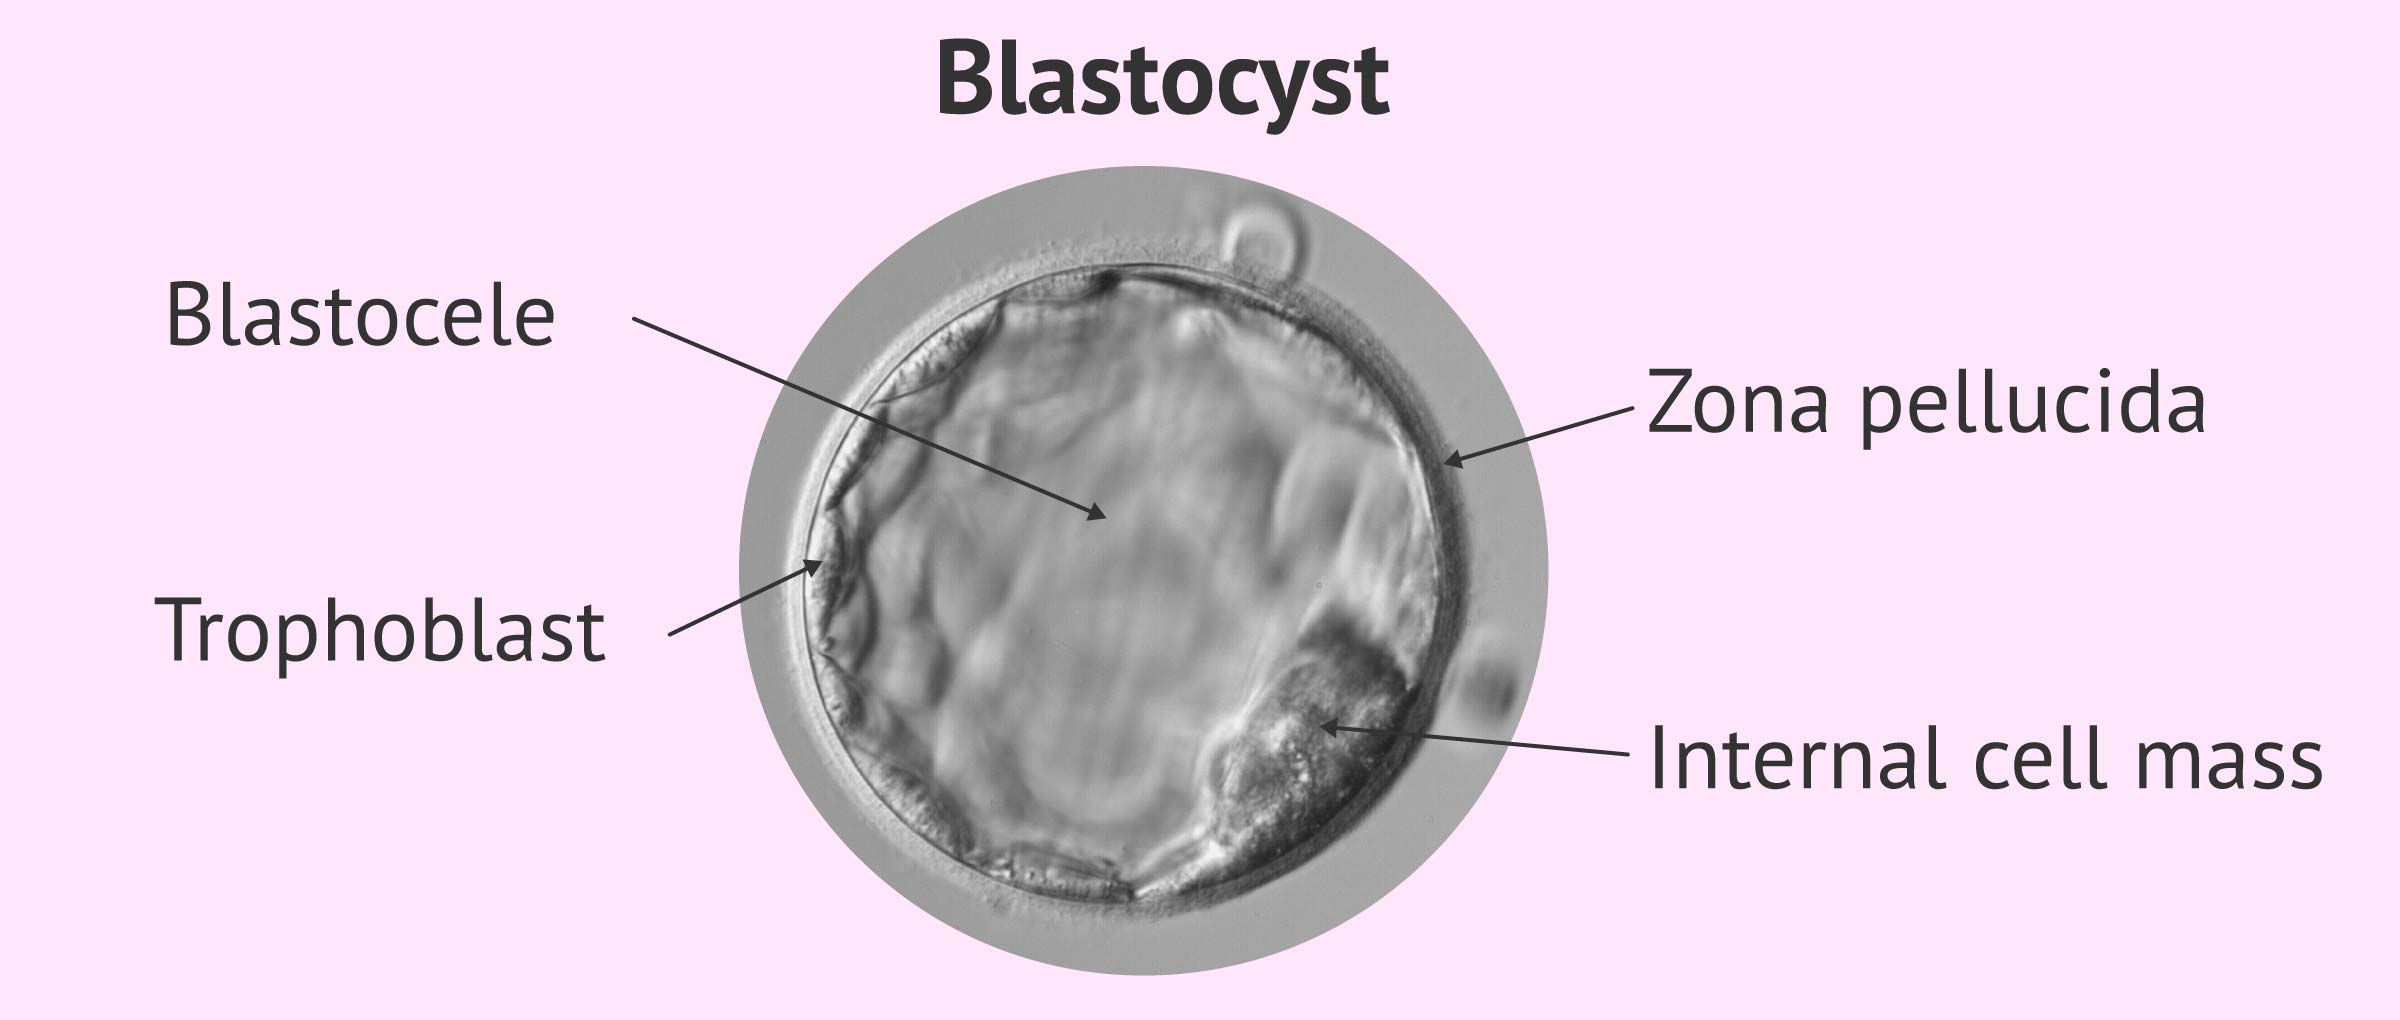 Stucture of the blastocyst